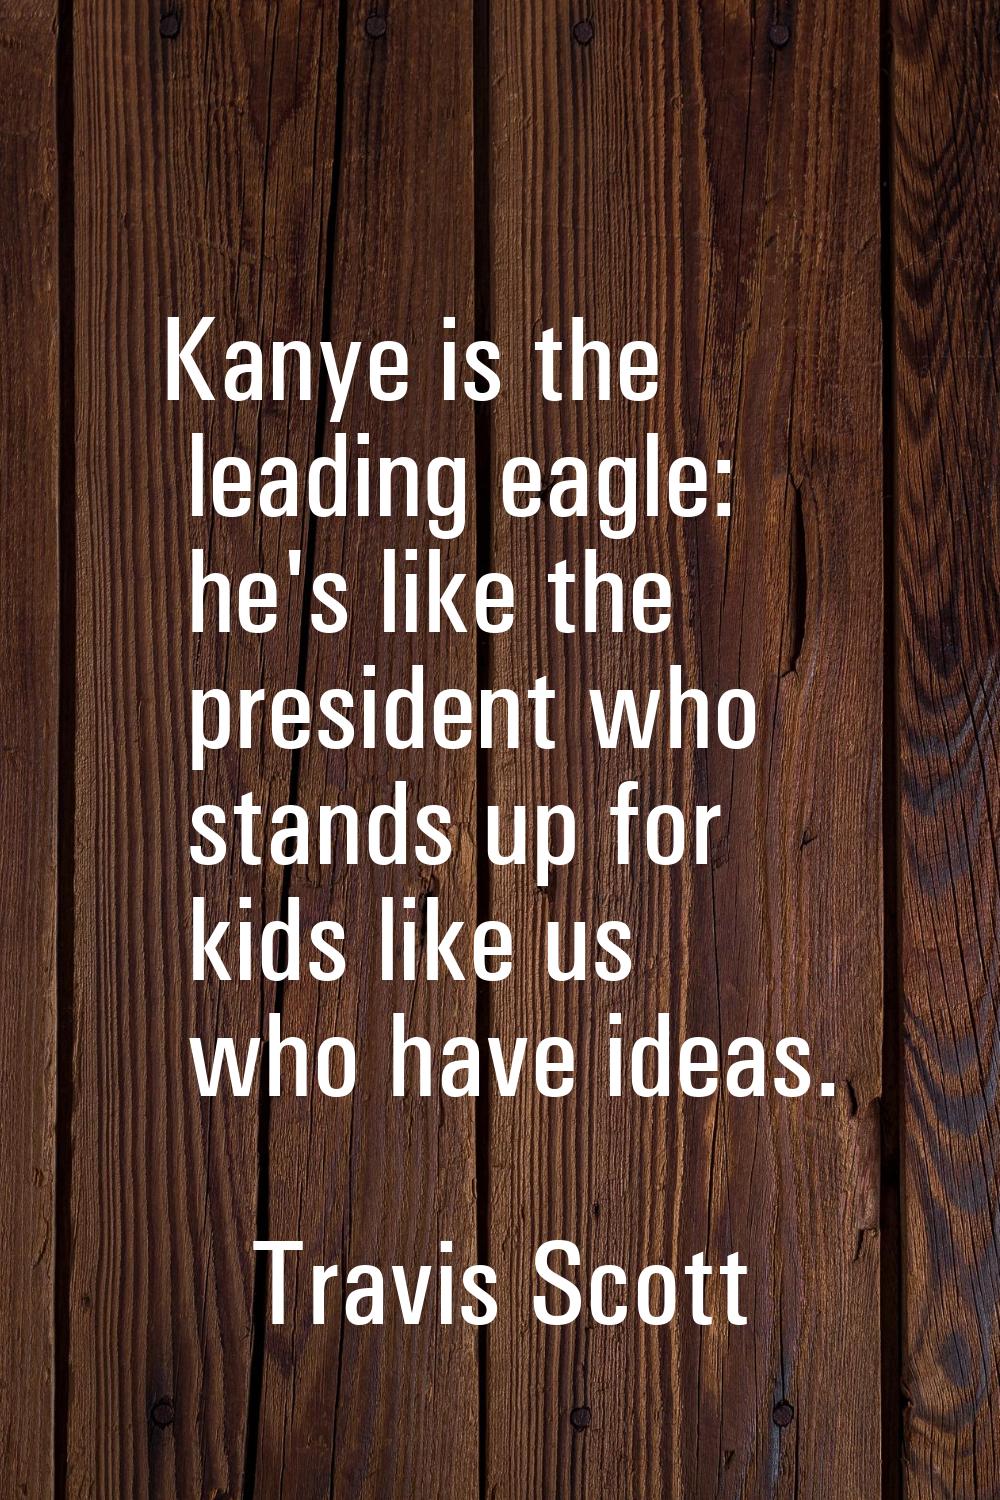 Kanye is the leading eagle: he's like the president who stands up for kids like us who have ideas.